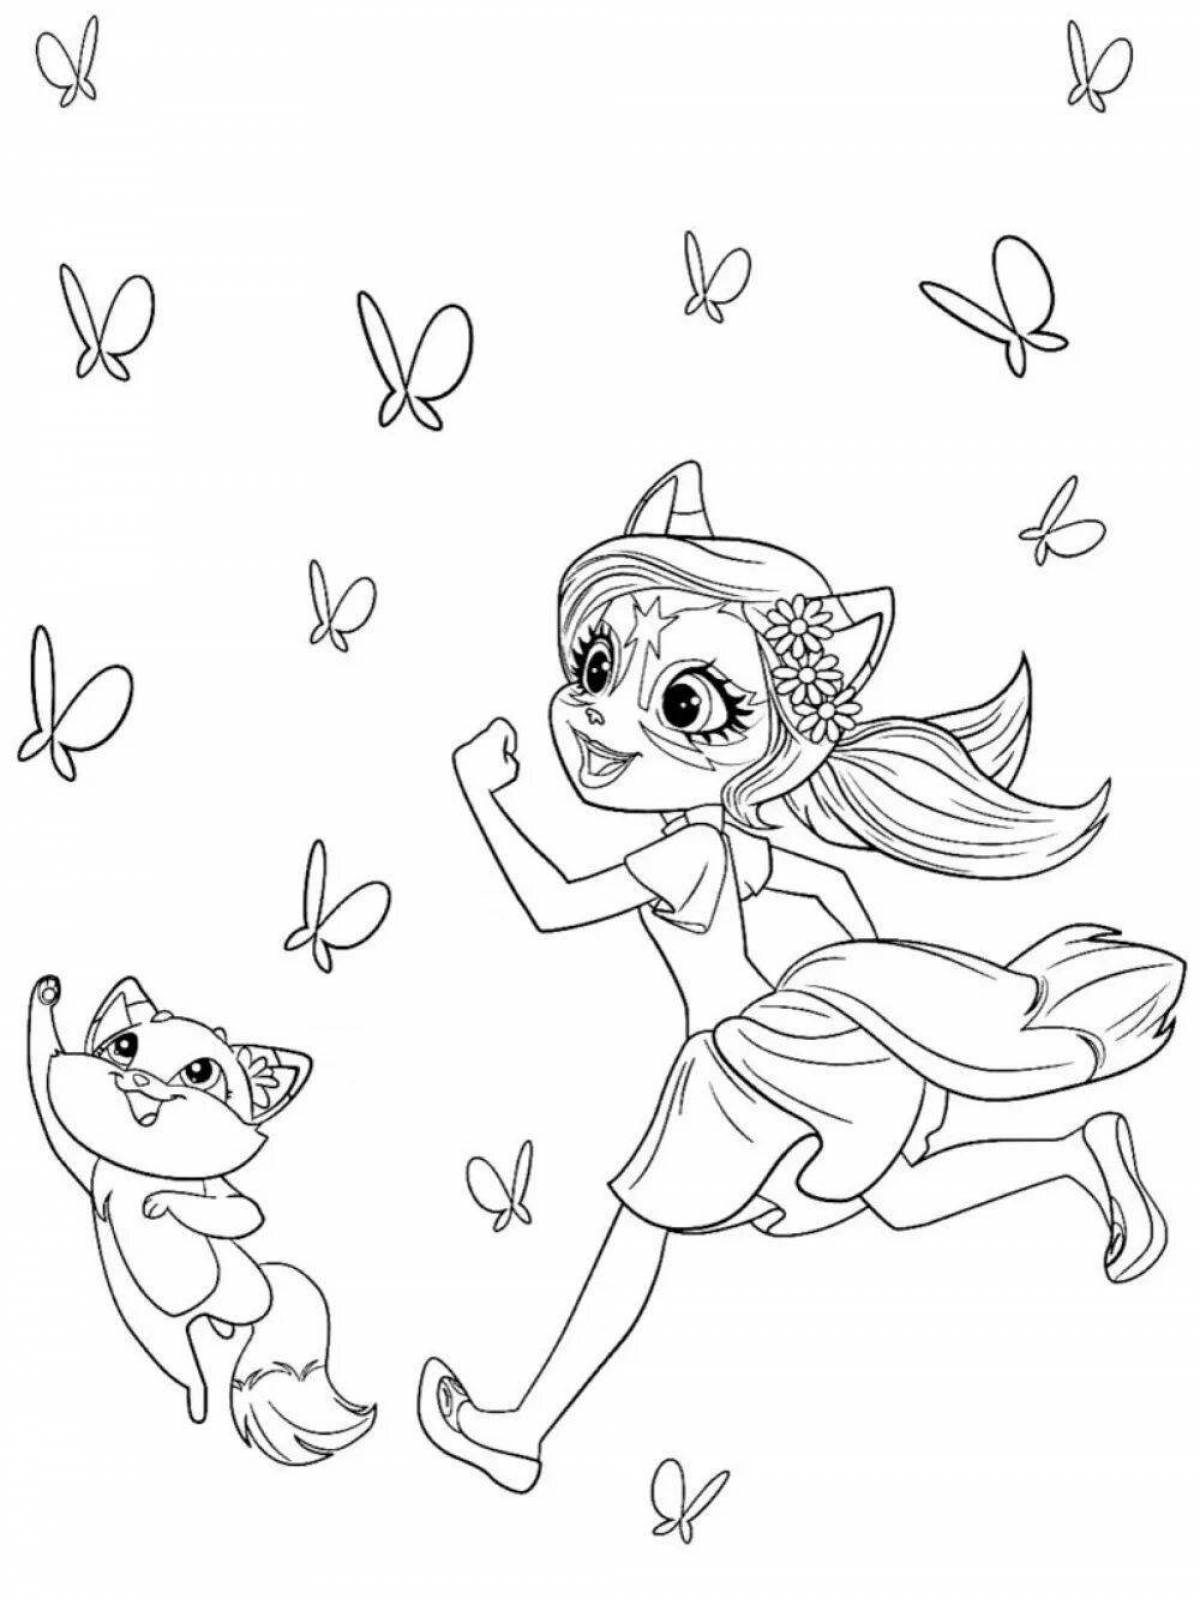 Enchantimals glowing cat coloring page